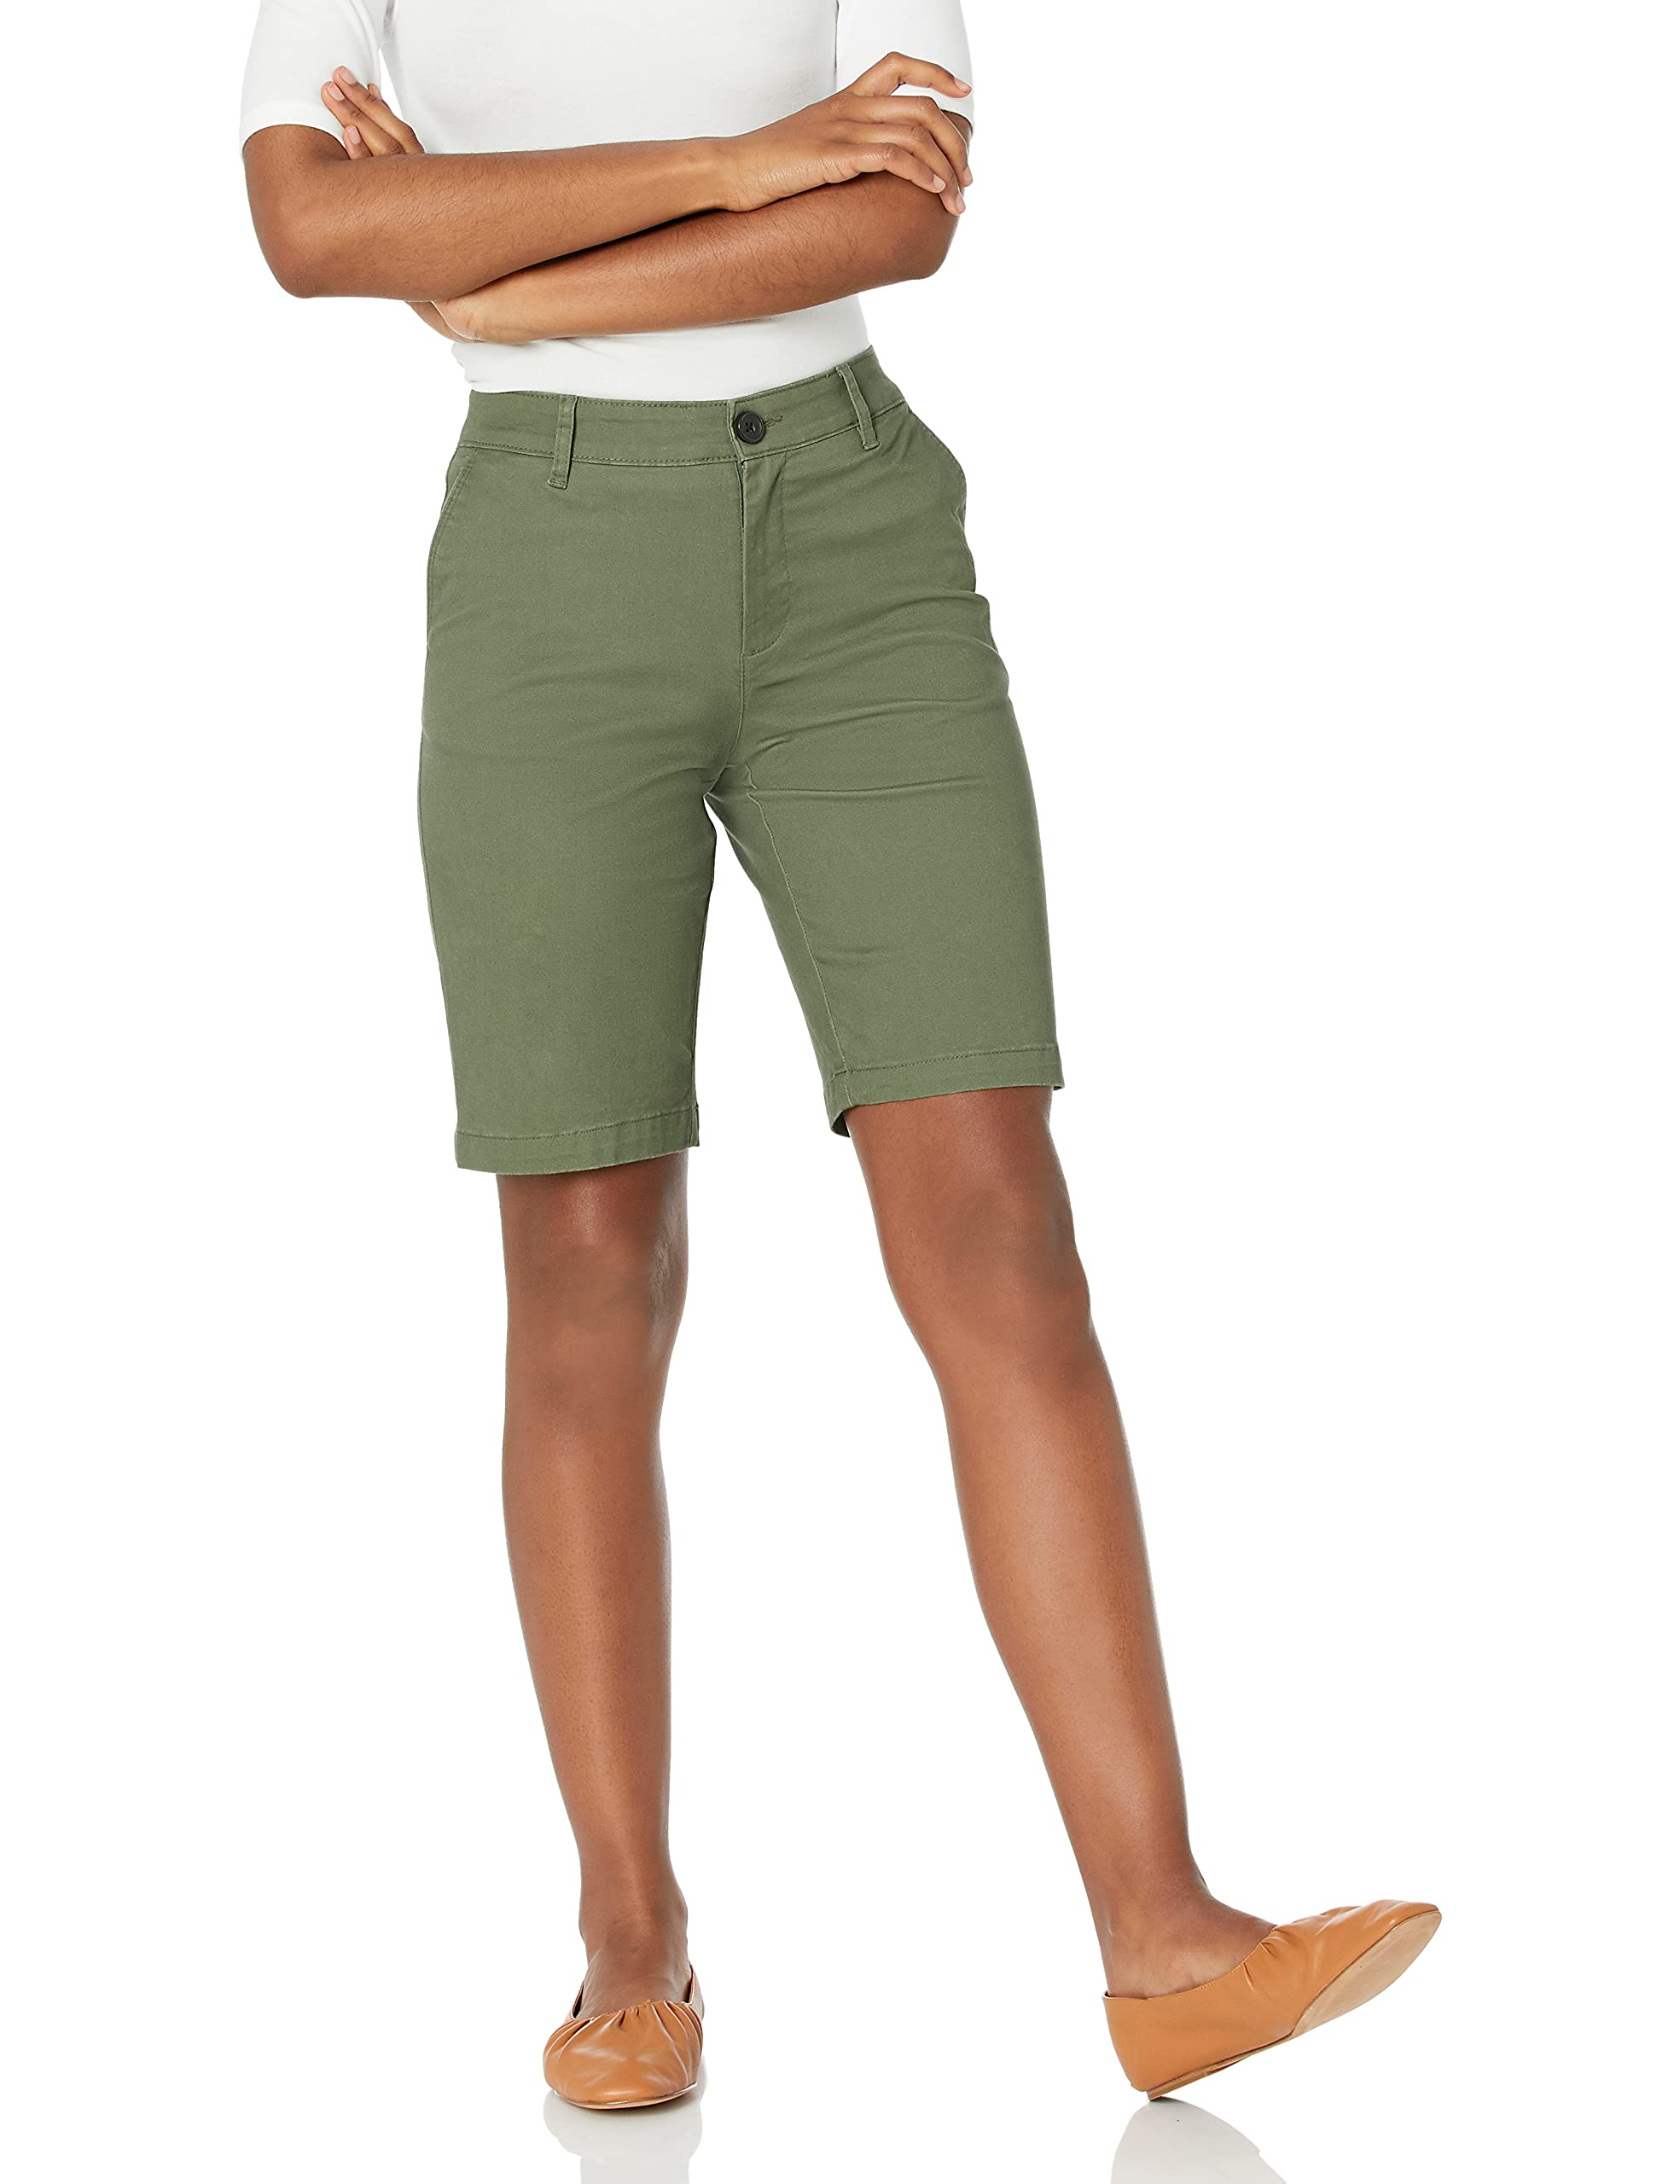 Amazon Essentials Women's Mid-Rise Slim-Fit 10" Inseam Bermuda Khaki Short (Various) from $5.90 + Free Shipping w/ Prime or on $35+